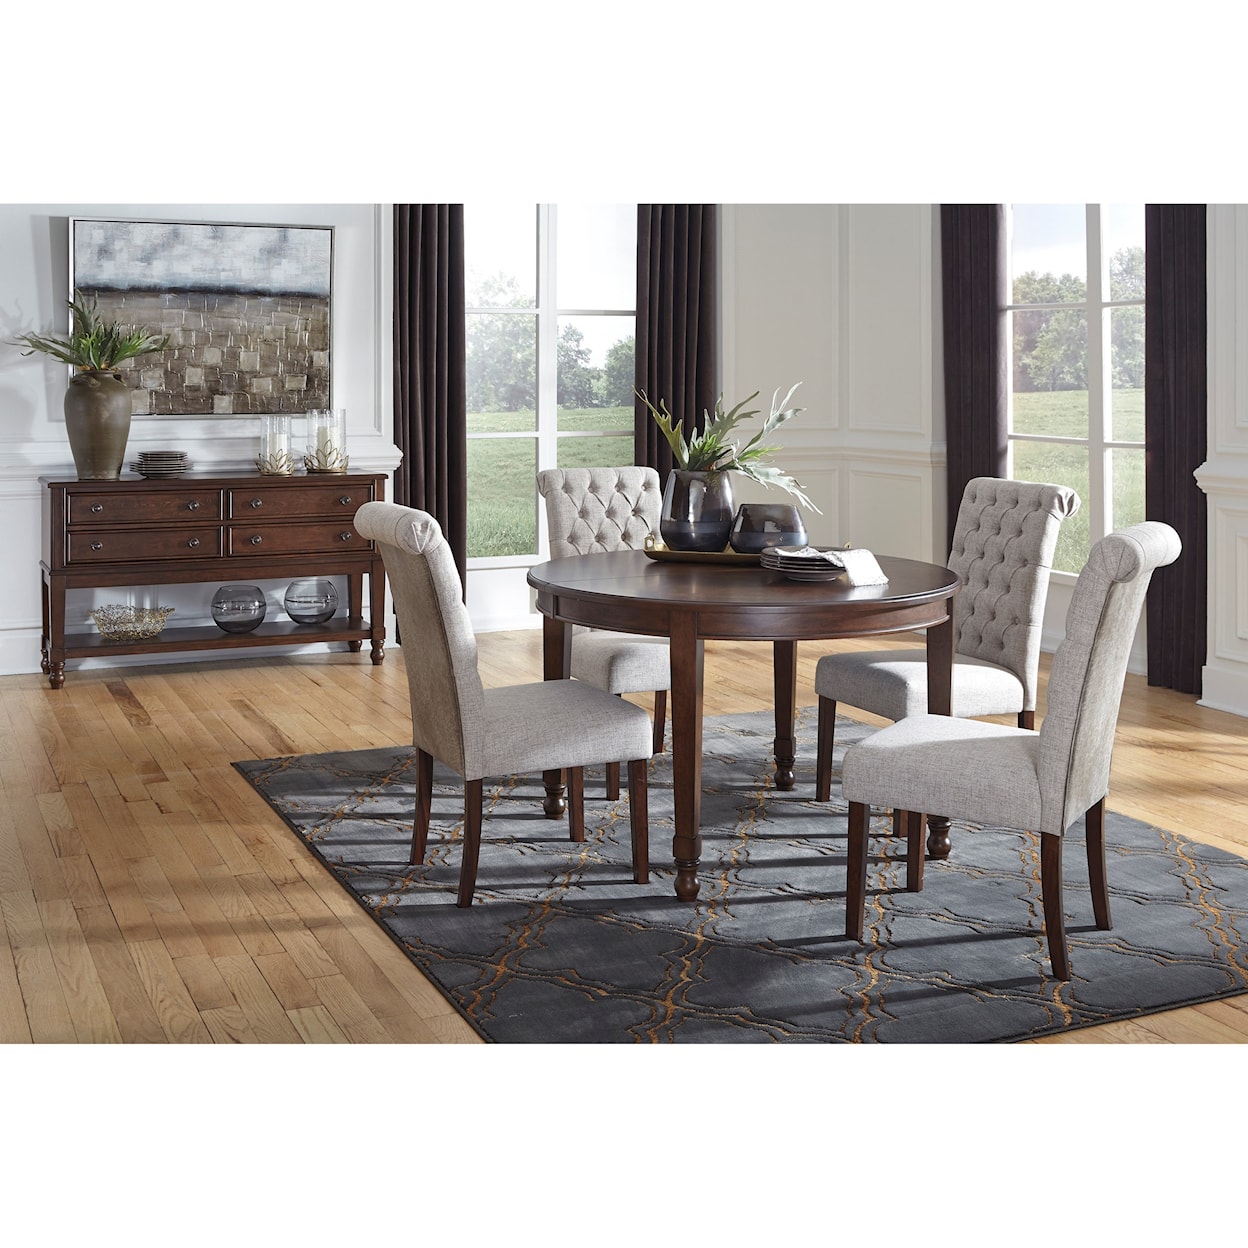 Benchcraft Adinton Casual Dining Room Group